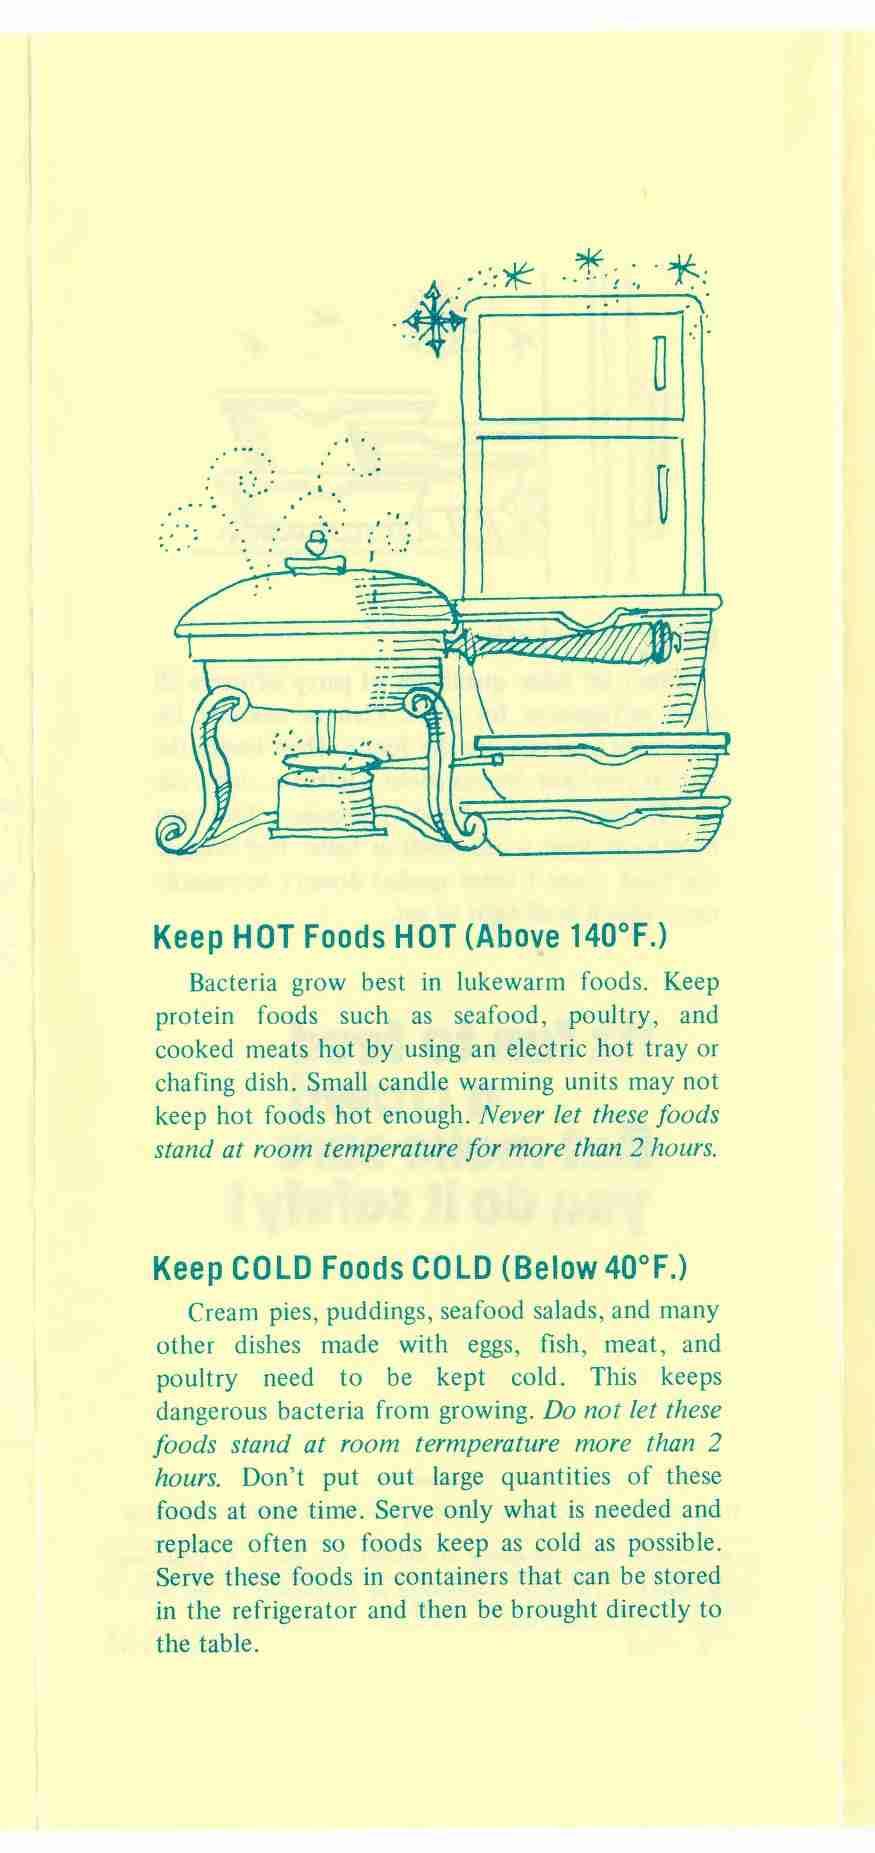 Keep HOT Foods HOT (Above 140 F.) Bacteria grow best in lukewarm foods. Keep protein foods such as seafood, poultry, and cooked meats hot by using an electric hot tray or chafing dish.